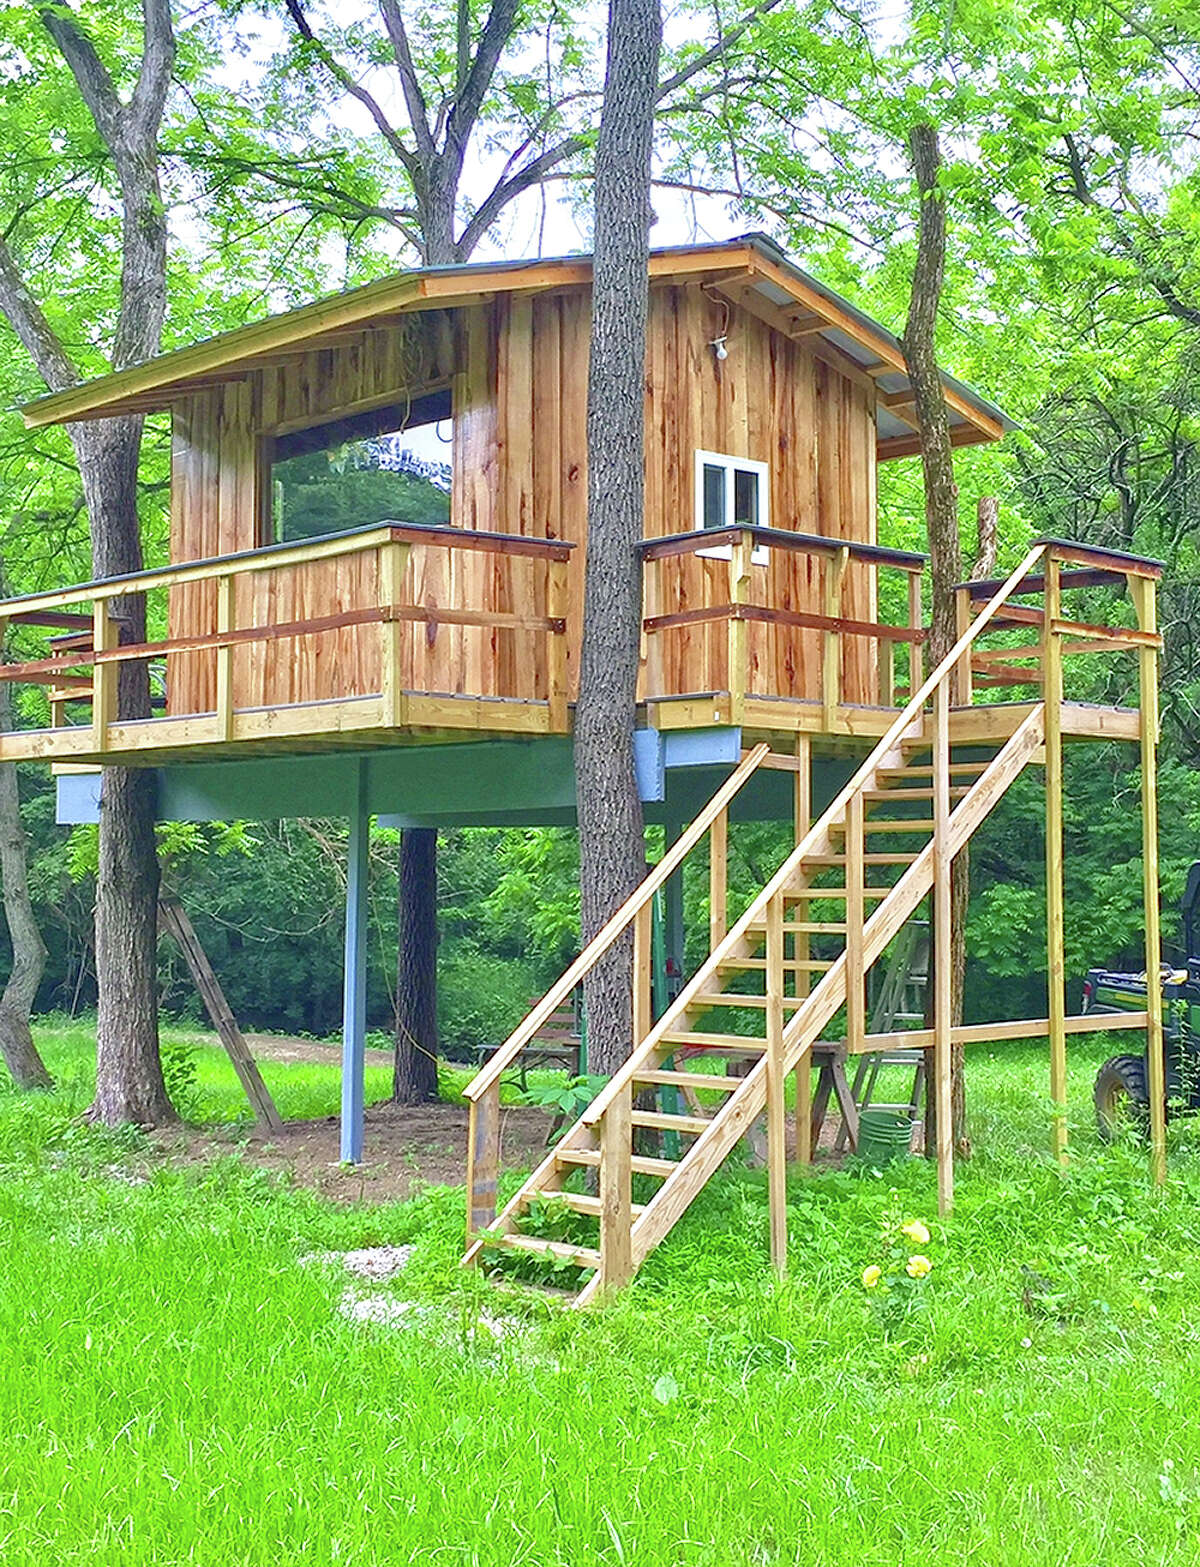 Kathy Caruthers' husband built this treehouse so she can photograph wildlife on their property near Waverly.